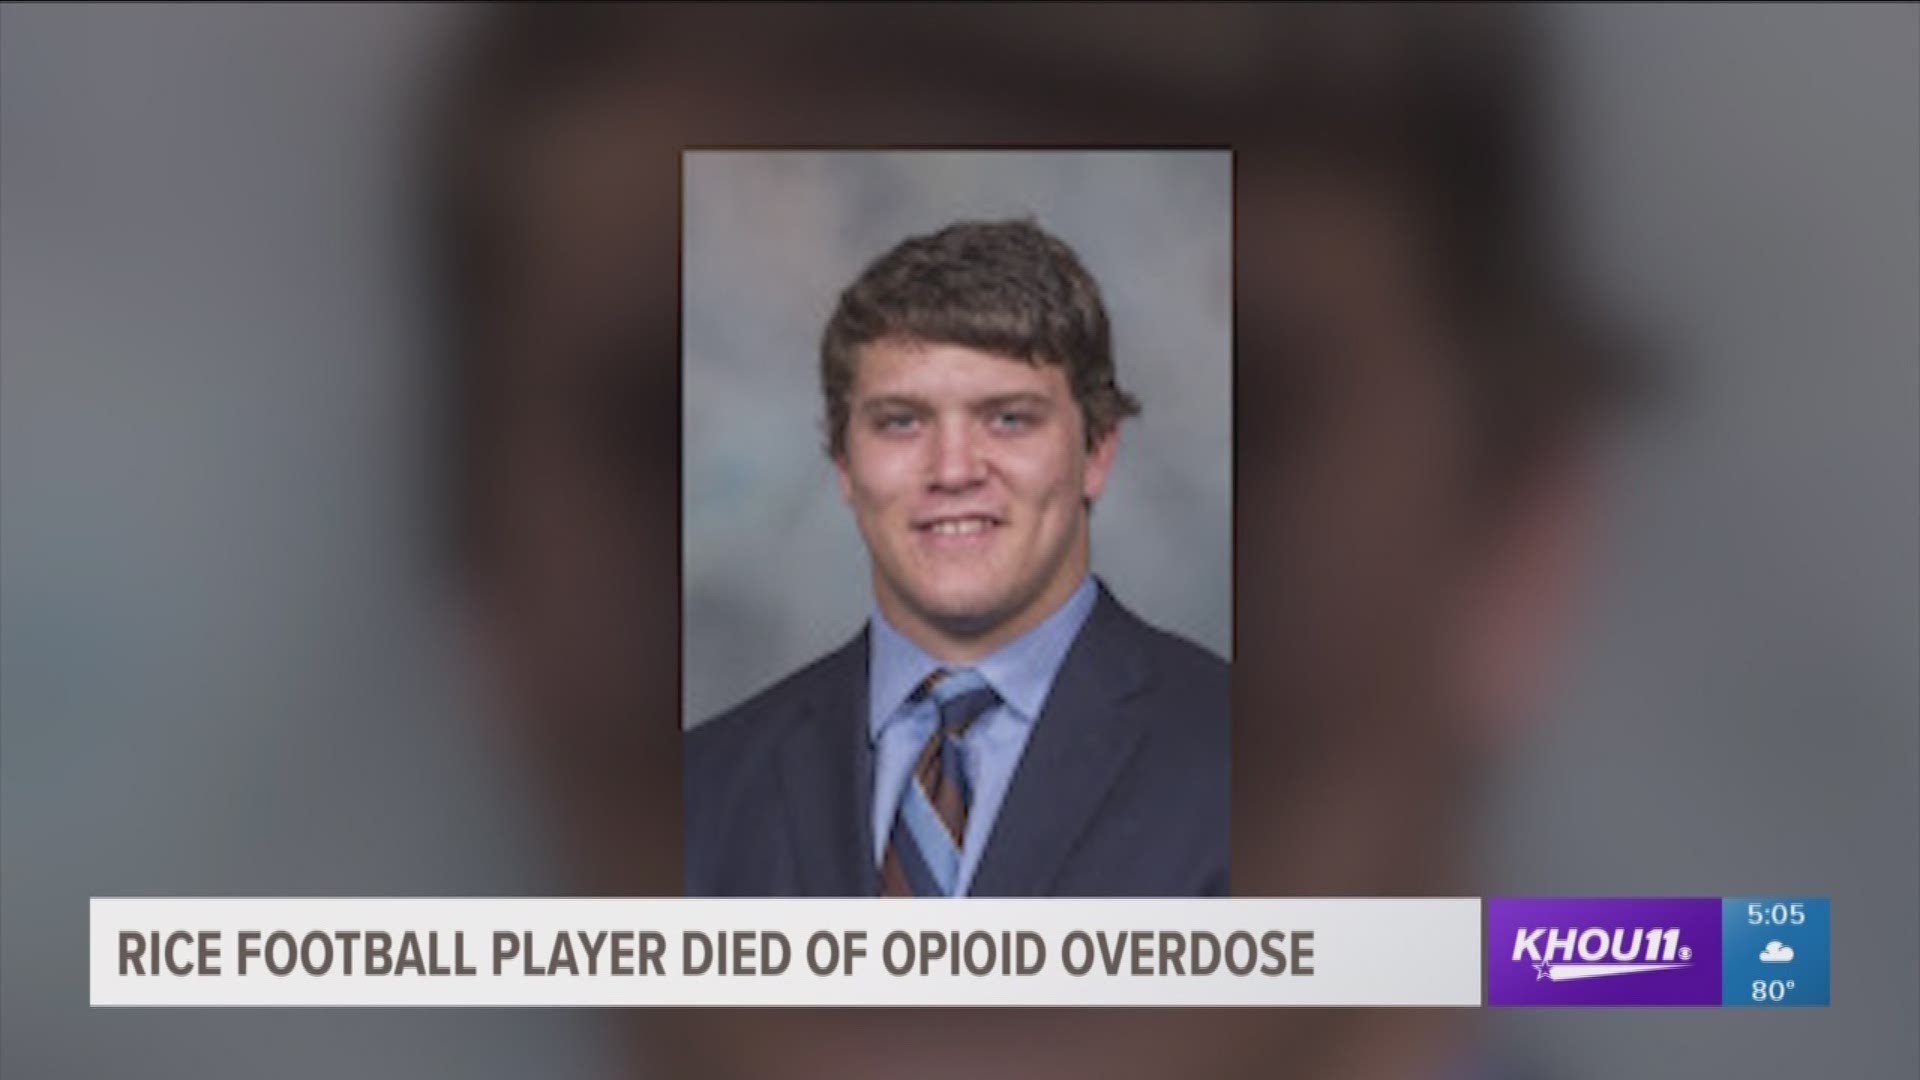 Blain Padgett, Rice University football player who was found dead in his apartment in March, died due to toxic effects of carfentanil. 